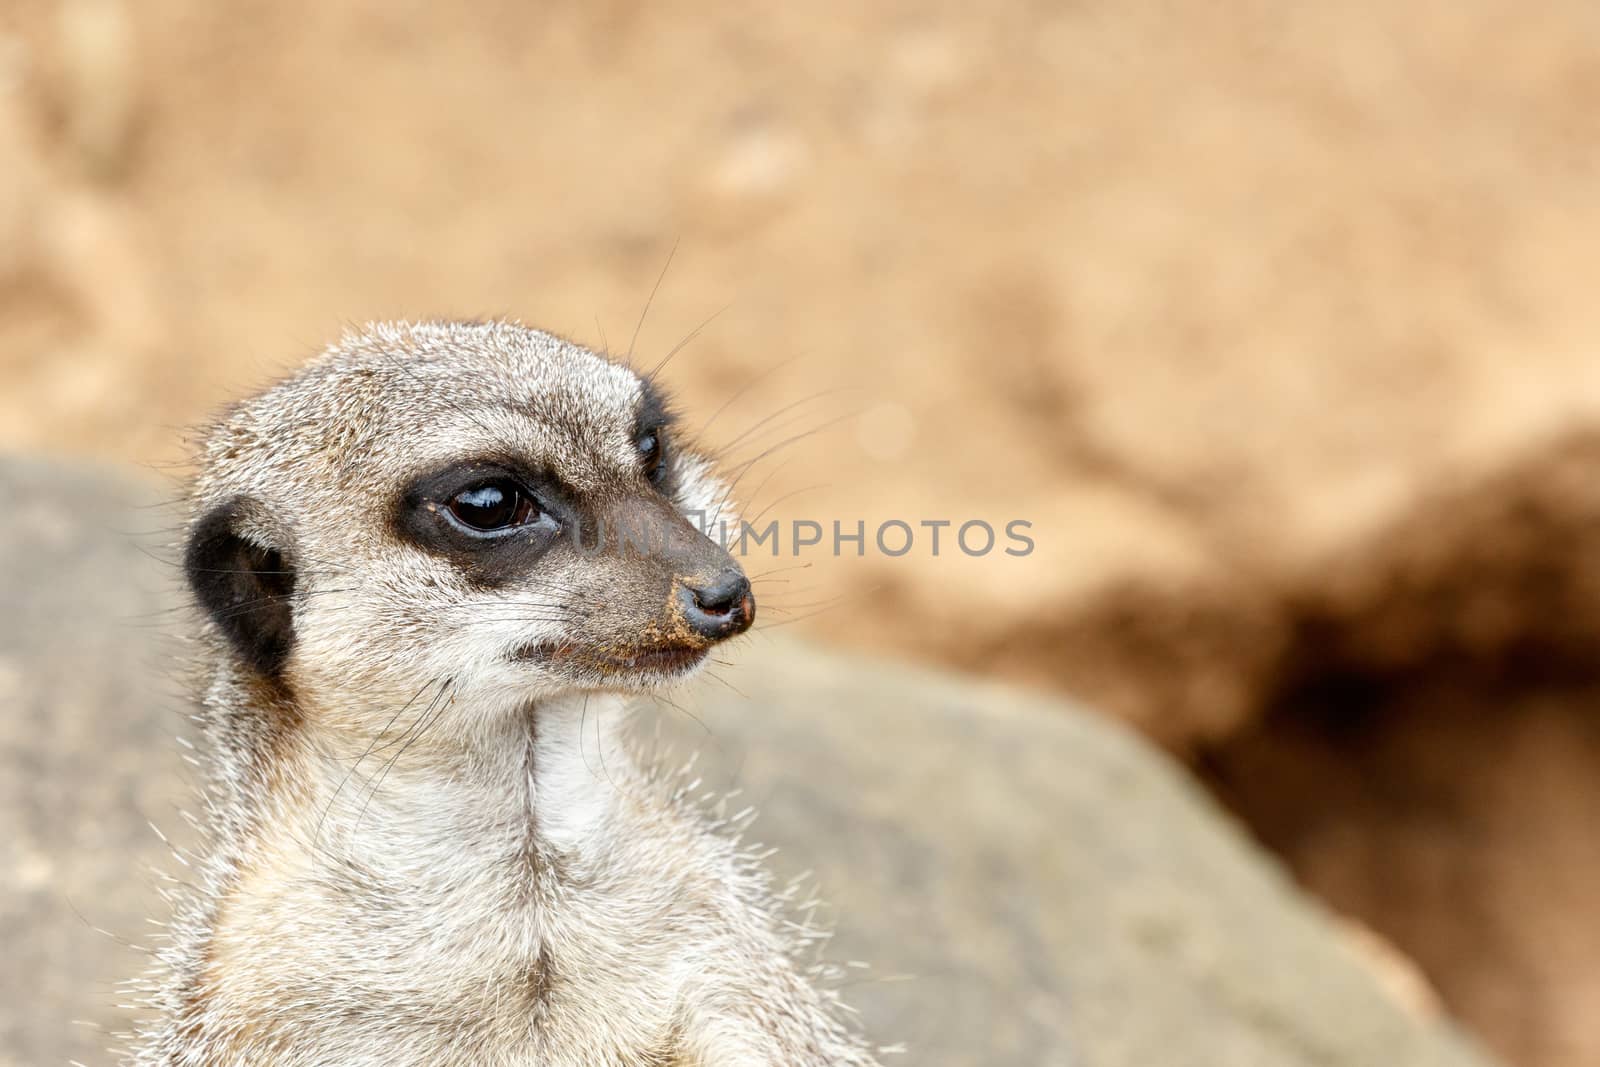 Meerkat standing and staring in a distance  by markdescande